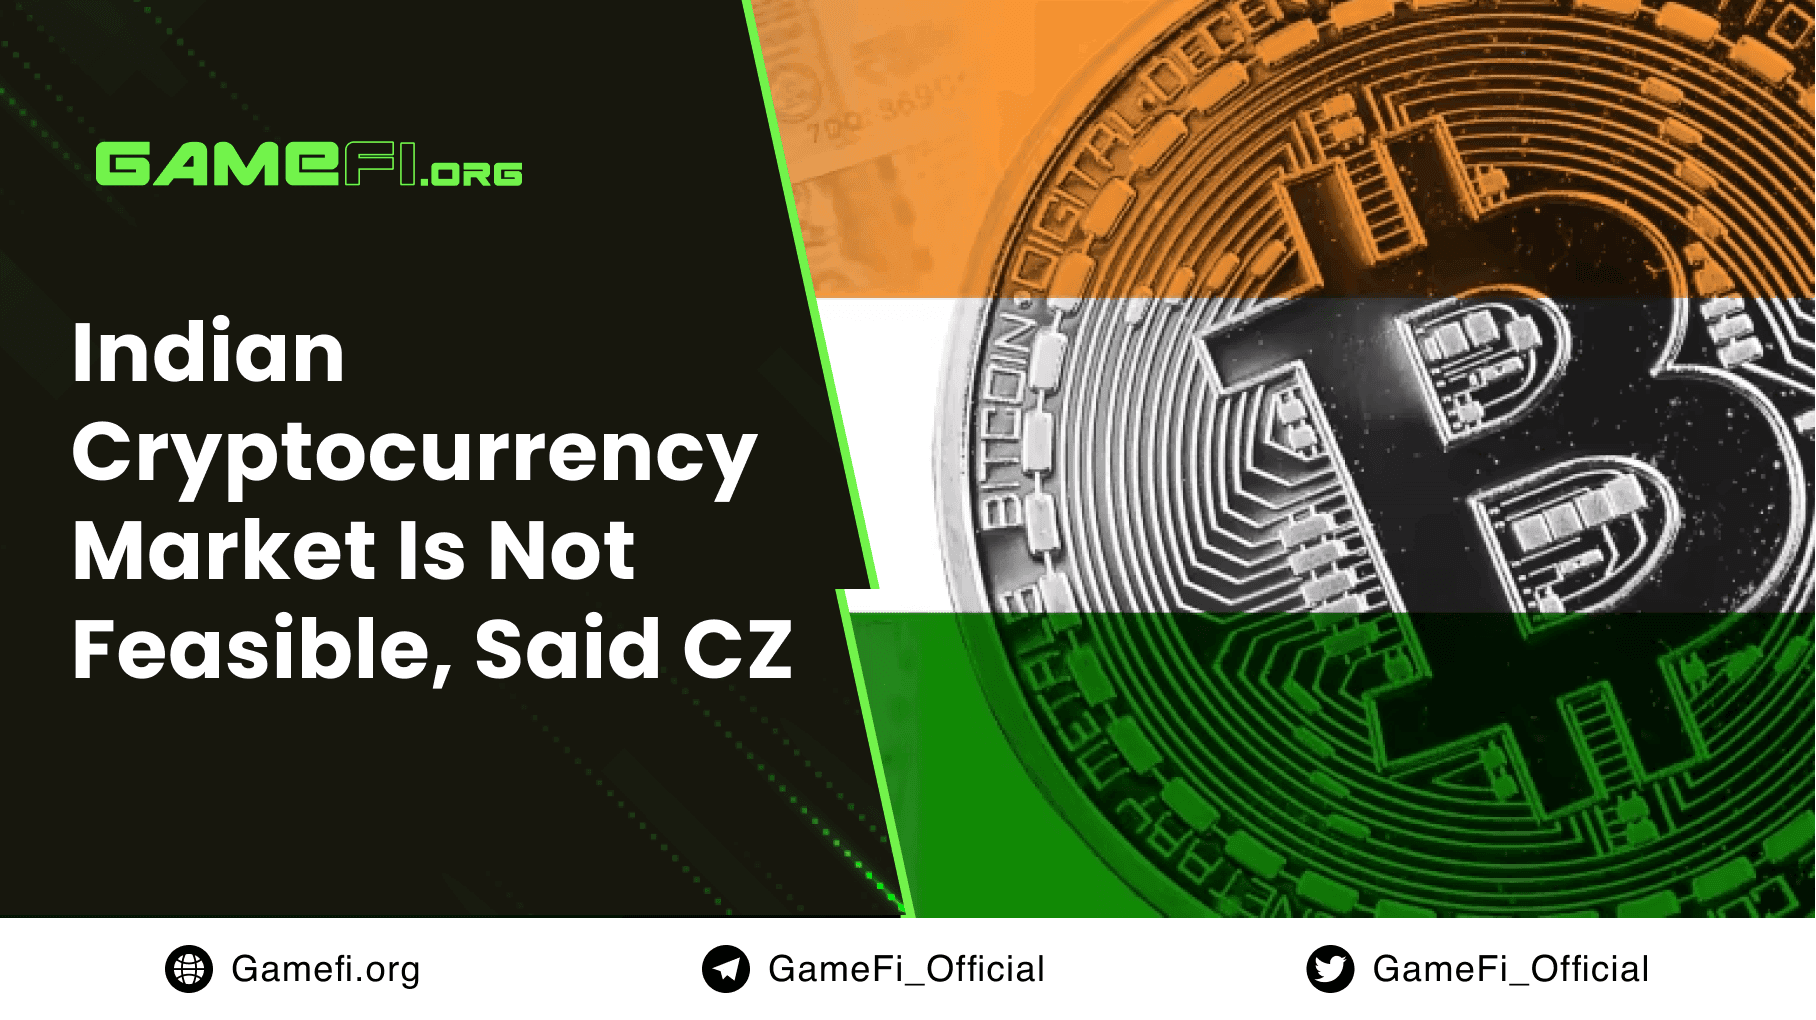 India's Cryptocurrency Market Is Not Feasible, Says CZ